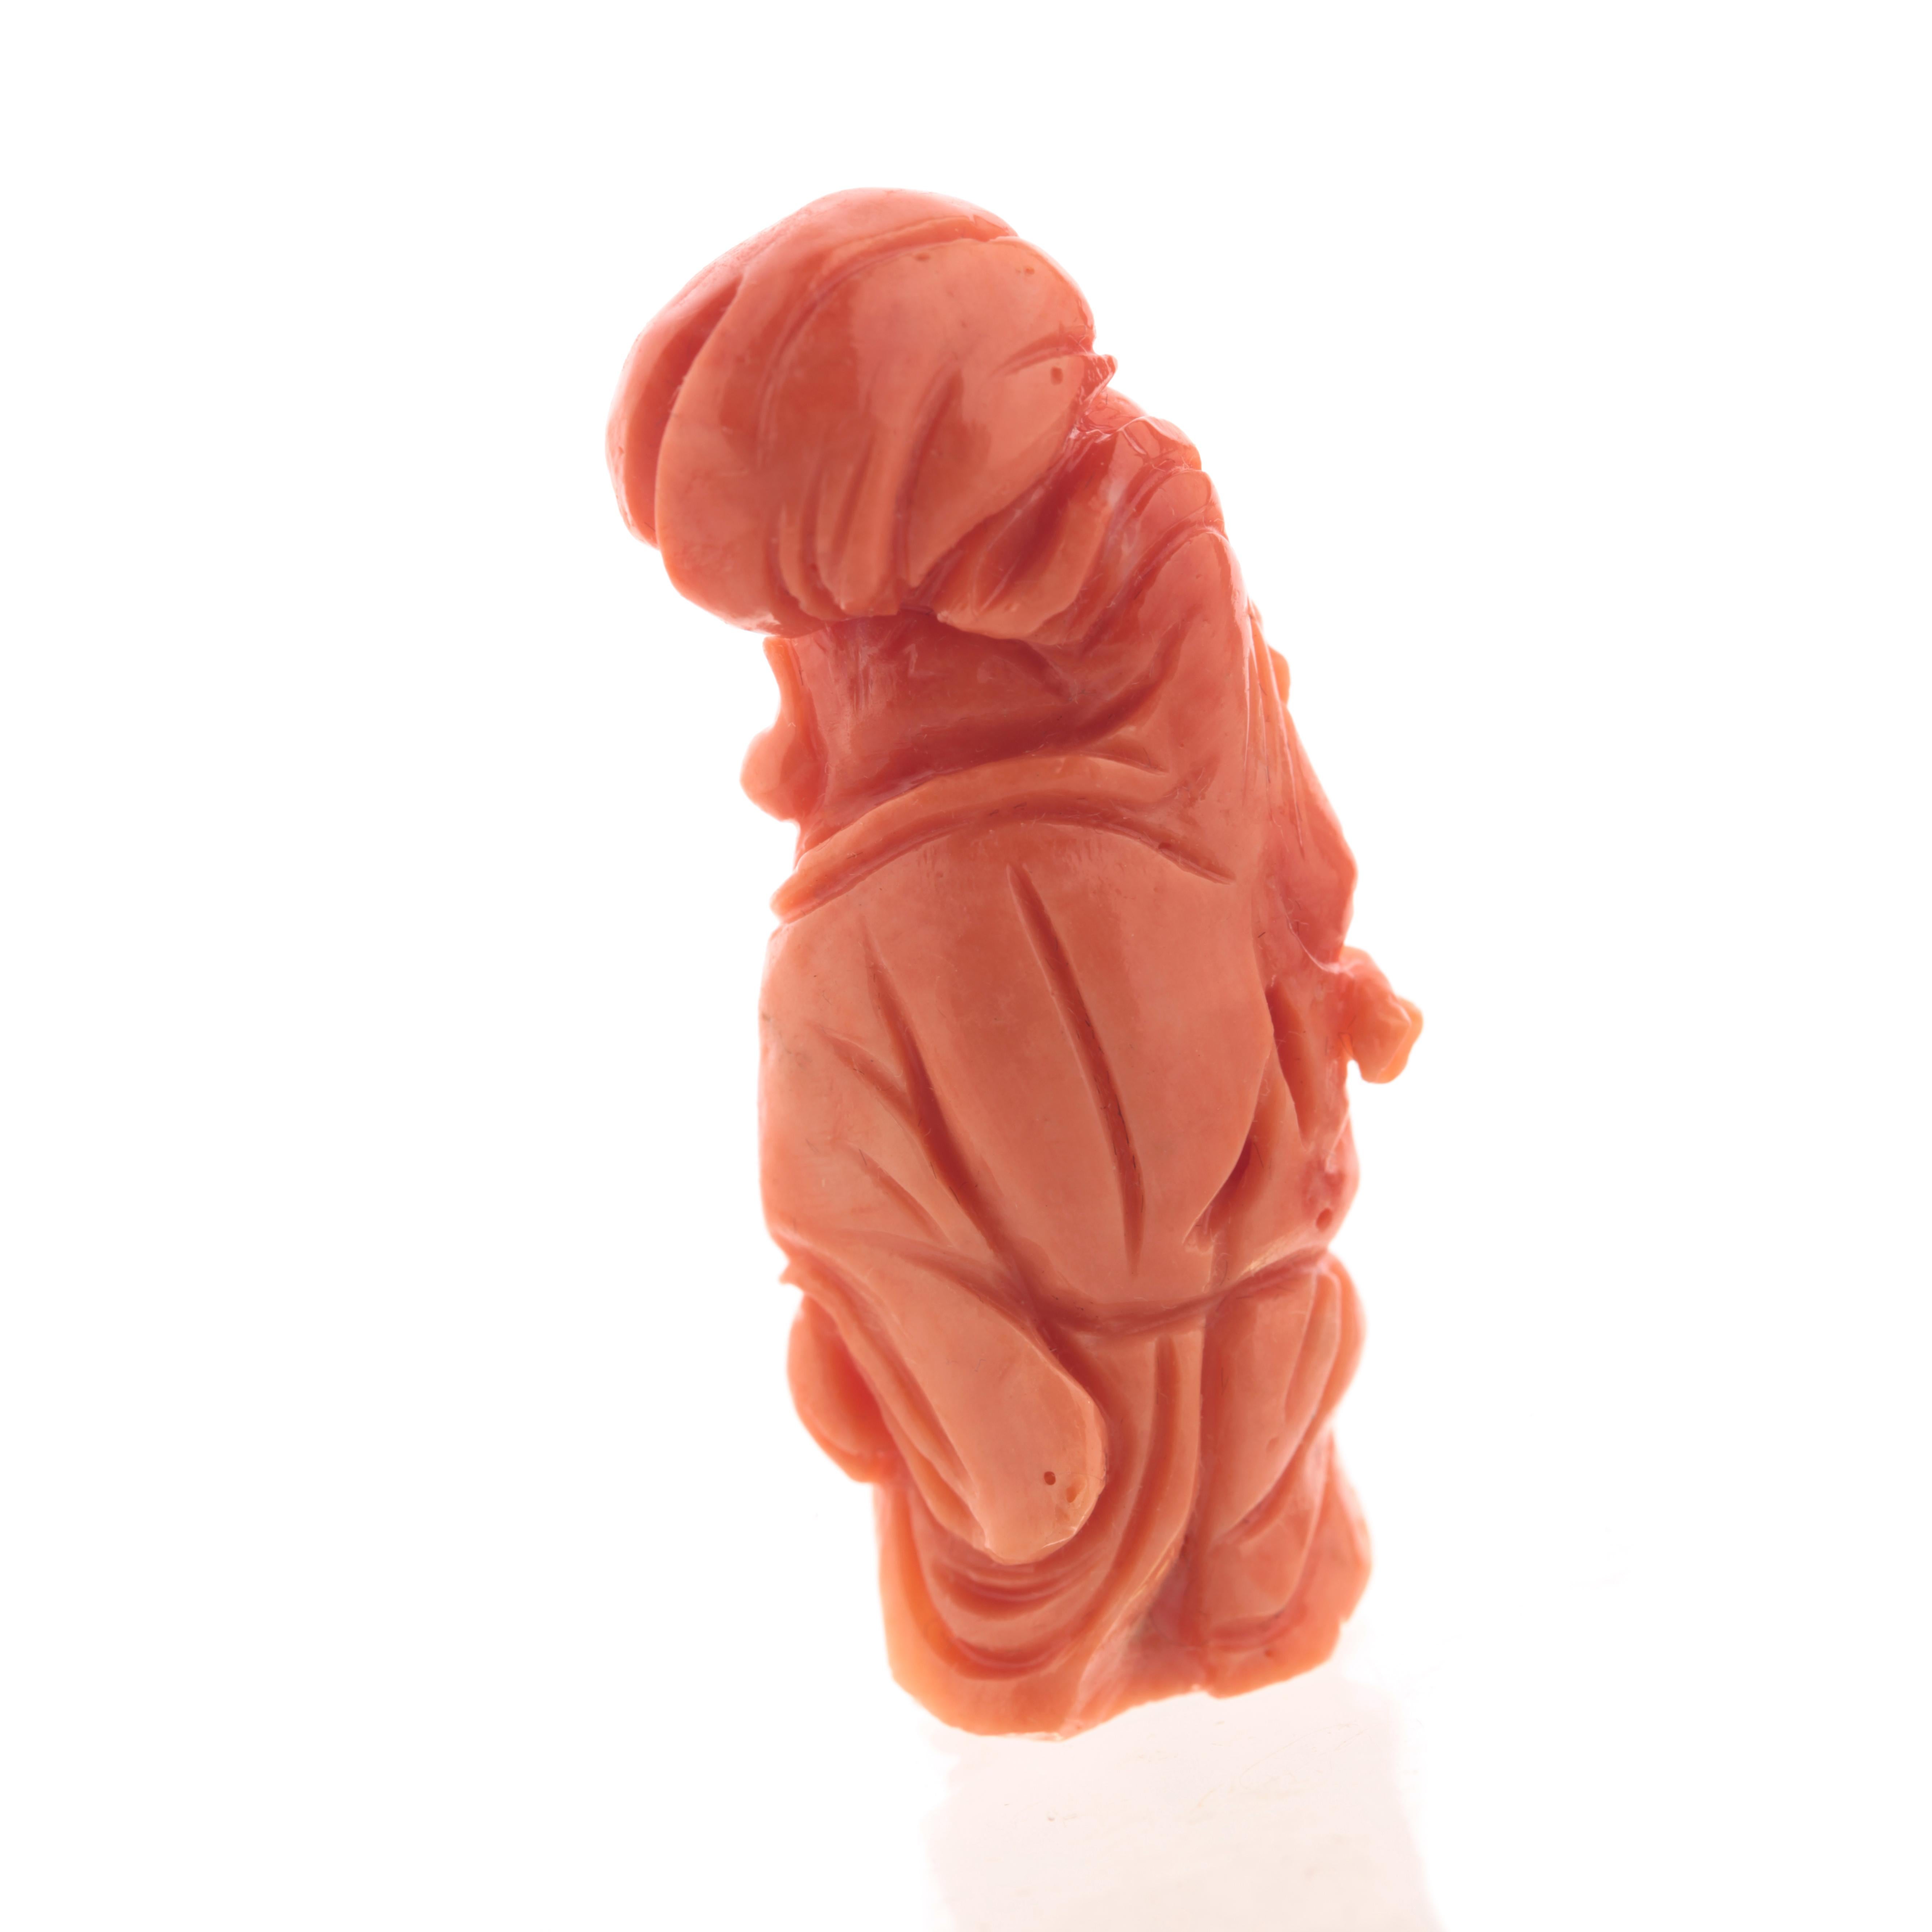 Chinese Export Laughing Buddha Carved Asian Decorative Art Statue Sculpture Natural Red Coral For Sale